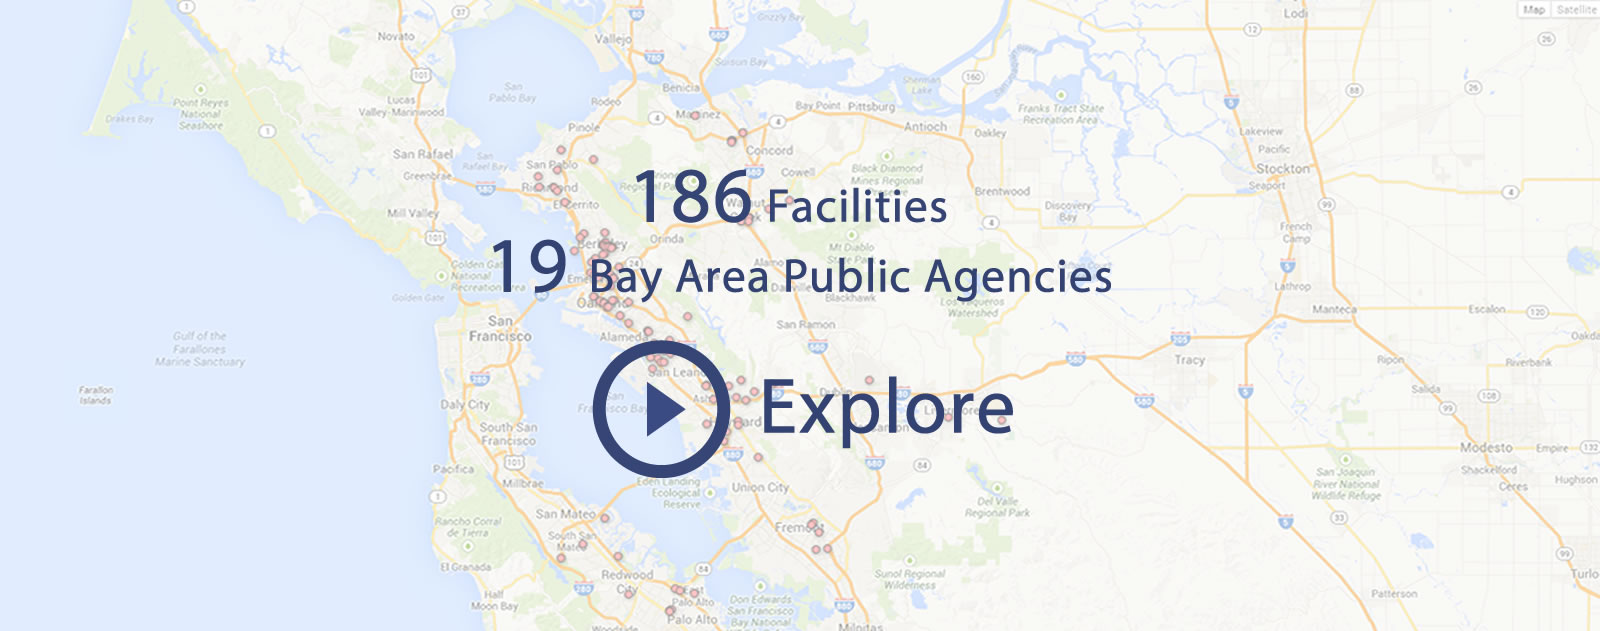 image of map with text '186 facilities, 19 bay area public agencies' and a call to explore the map further